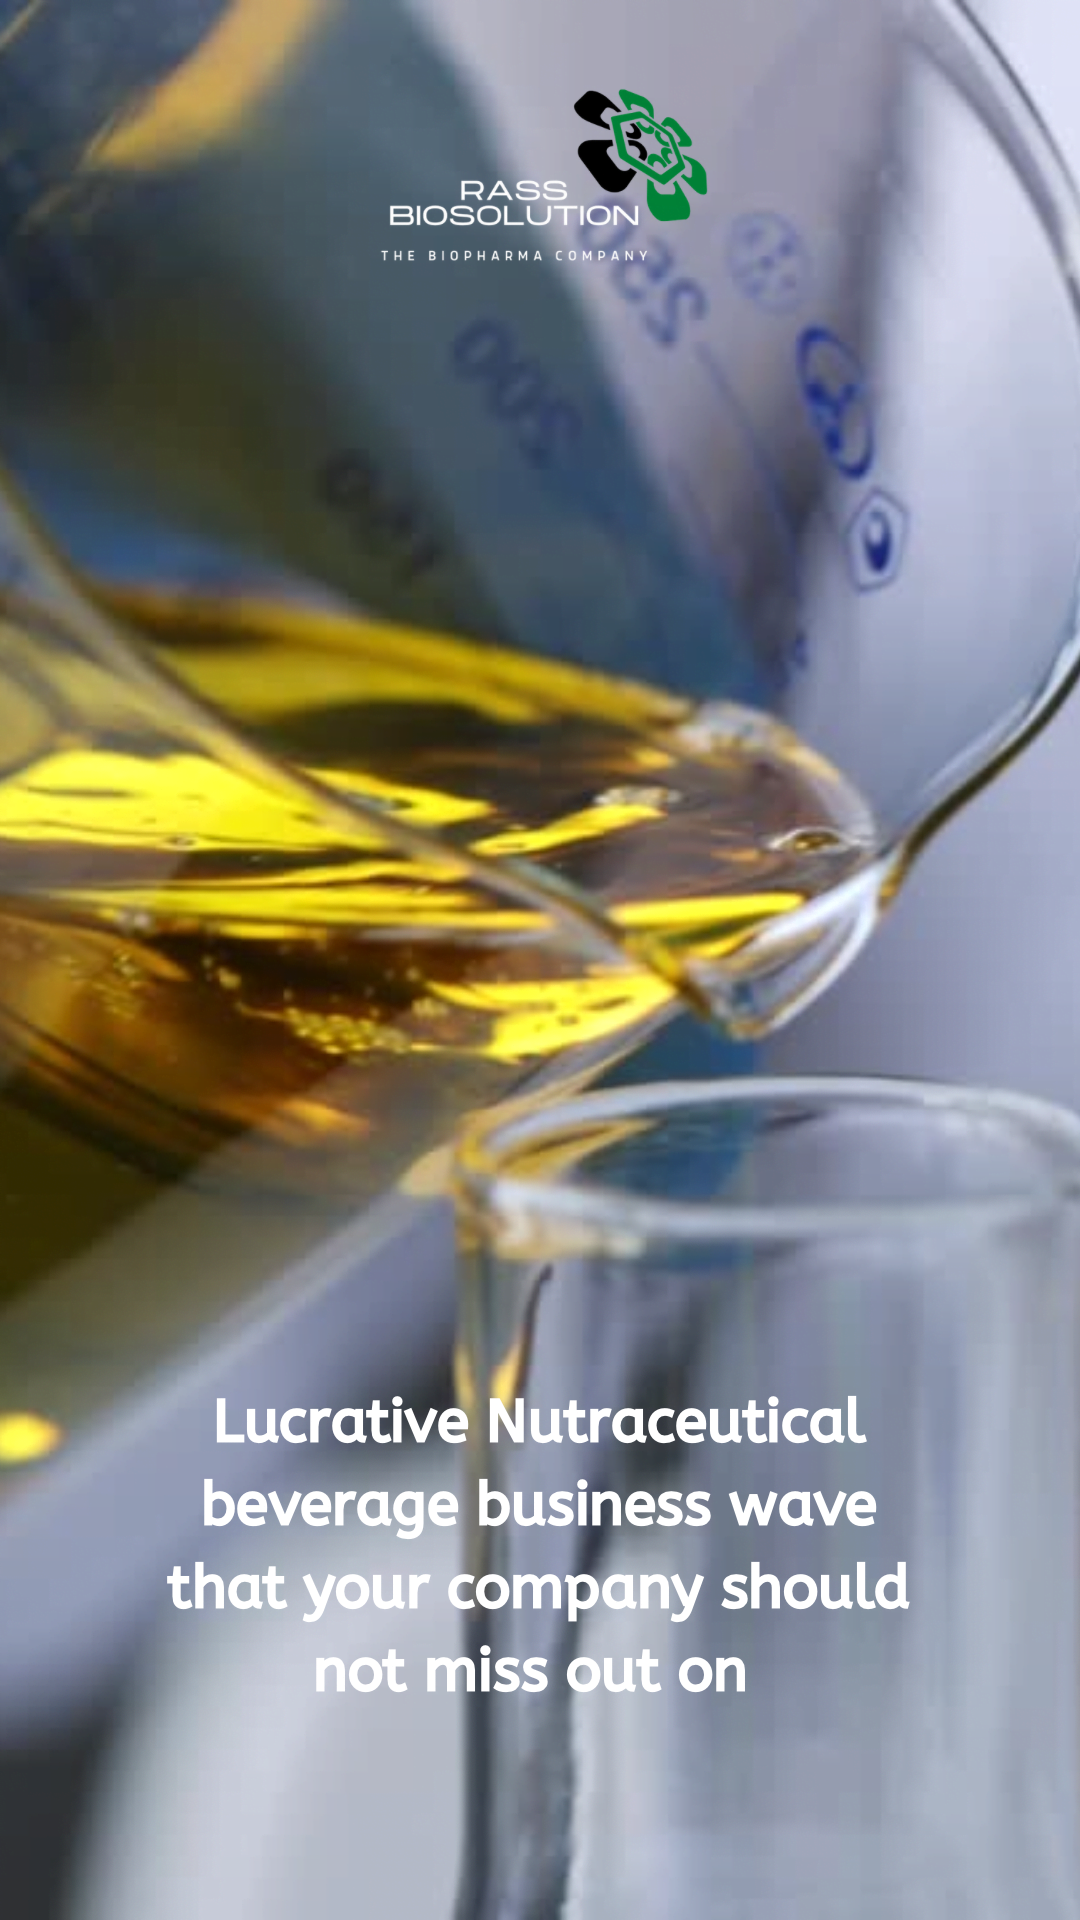 Nutraceutical beverage manufacturing